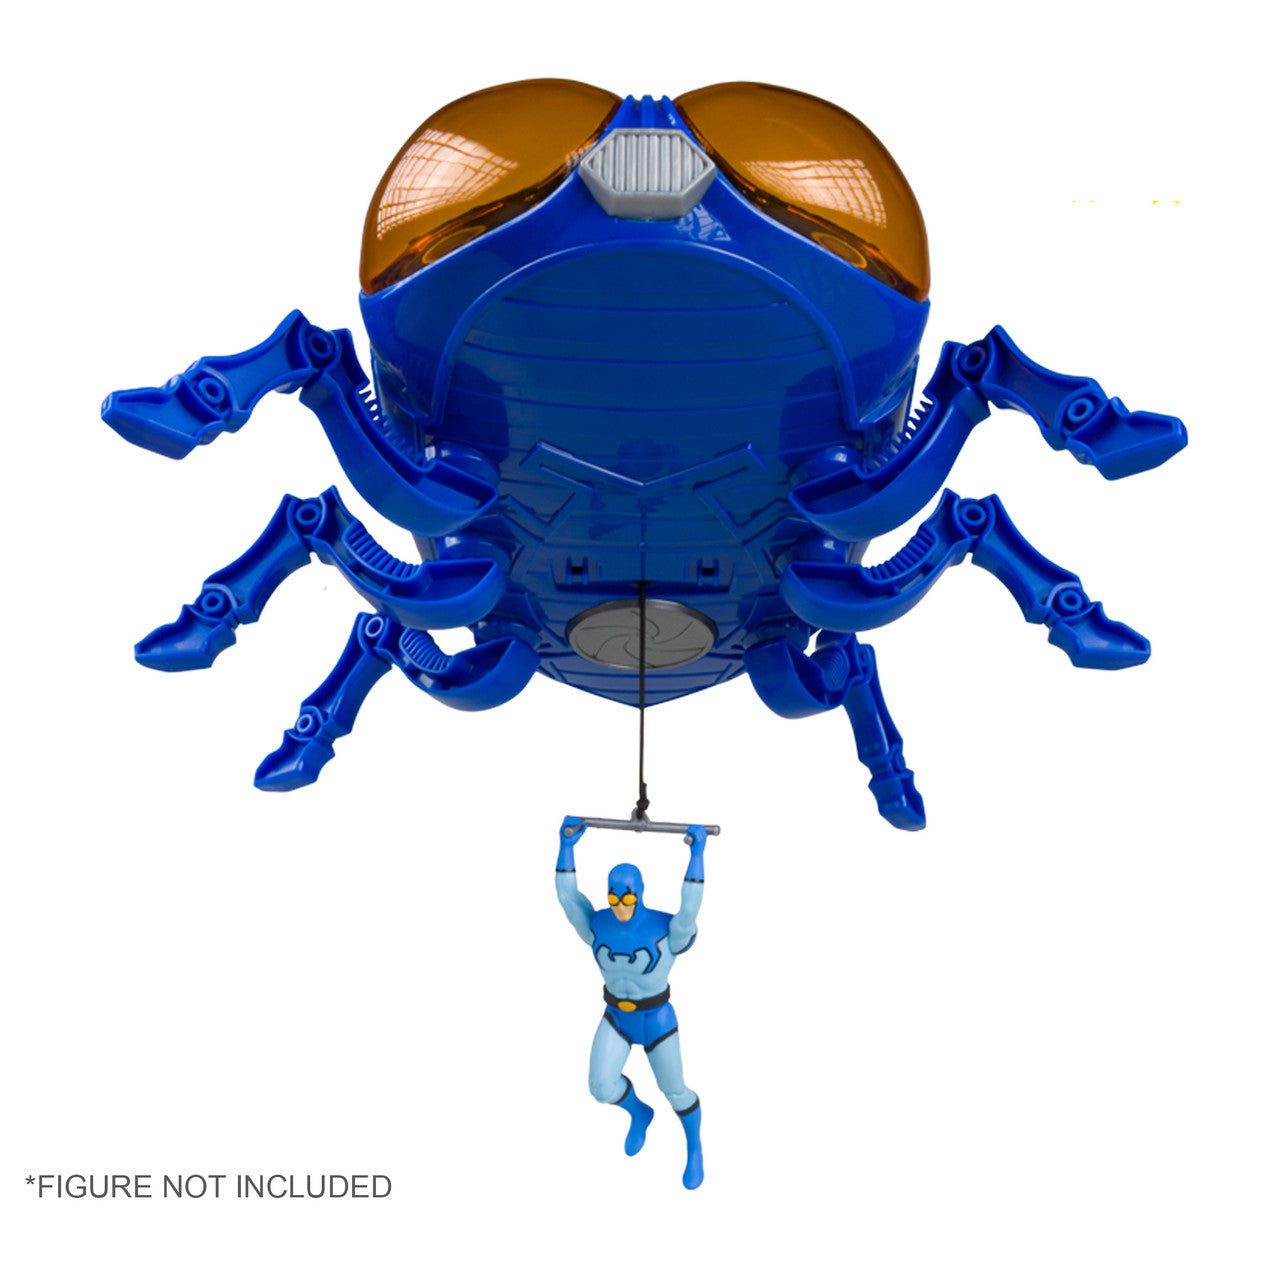 DC Super Powers The Bug (Blue Beetle's Aerial Vehicle)